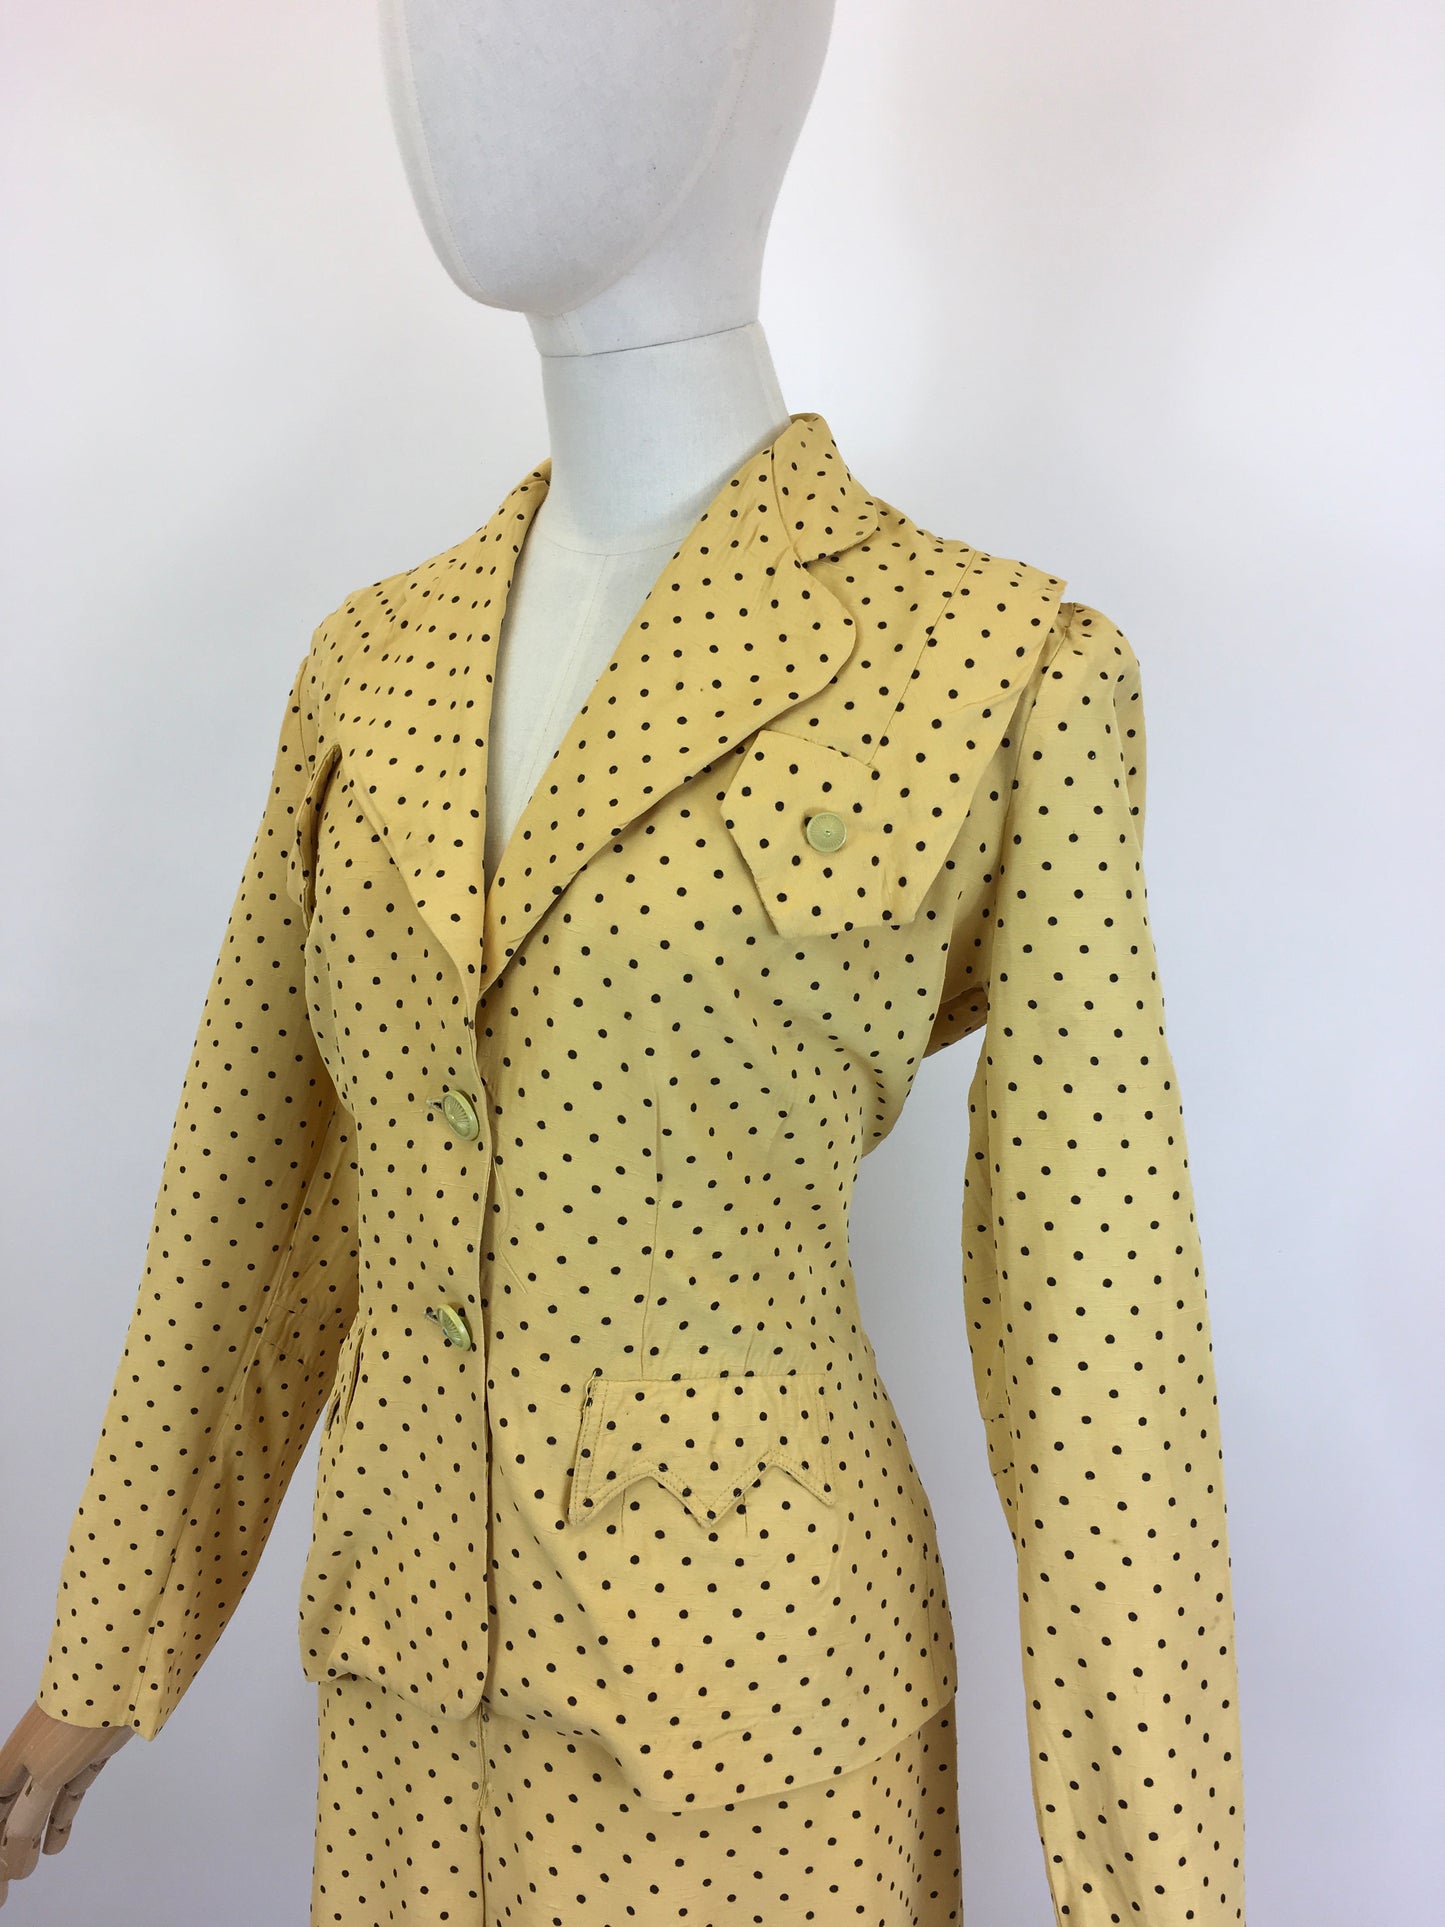 Original 1940's Sublime 2pc Summer Suit by ' New York Creations' - In A Primrose Yellow & Warm Brown Polka Dot